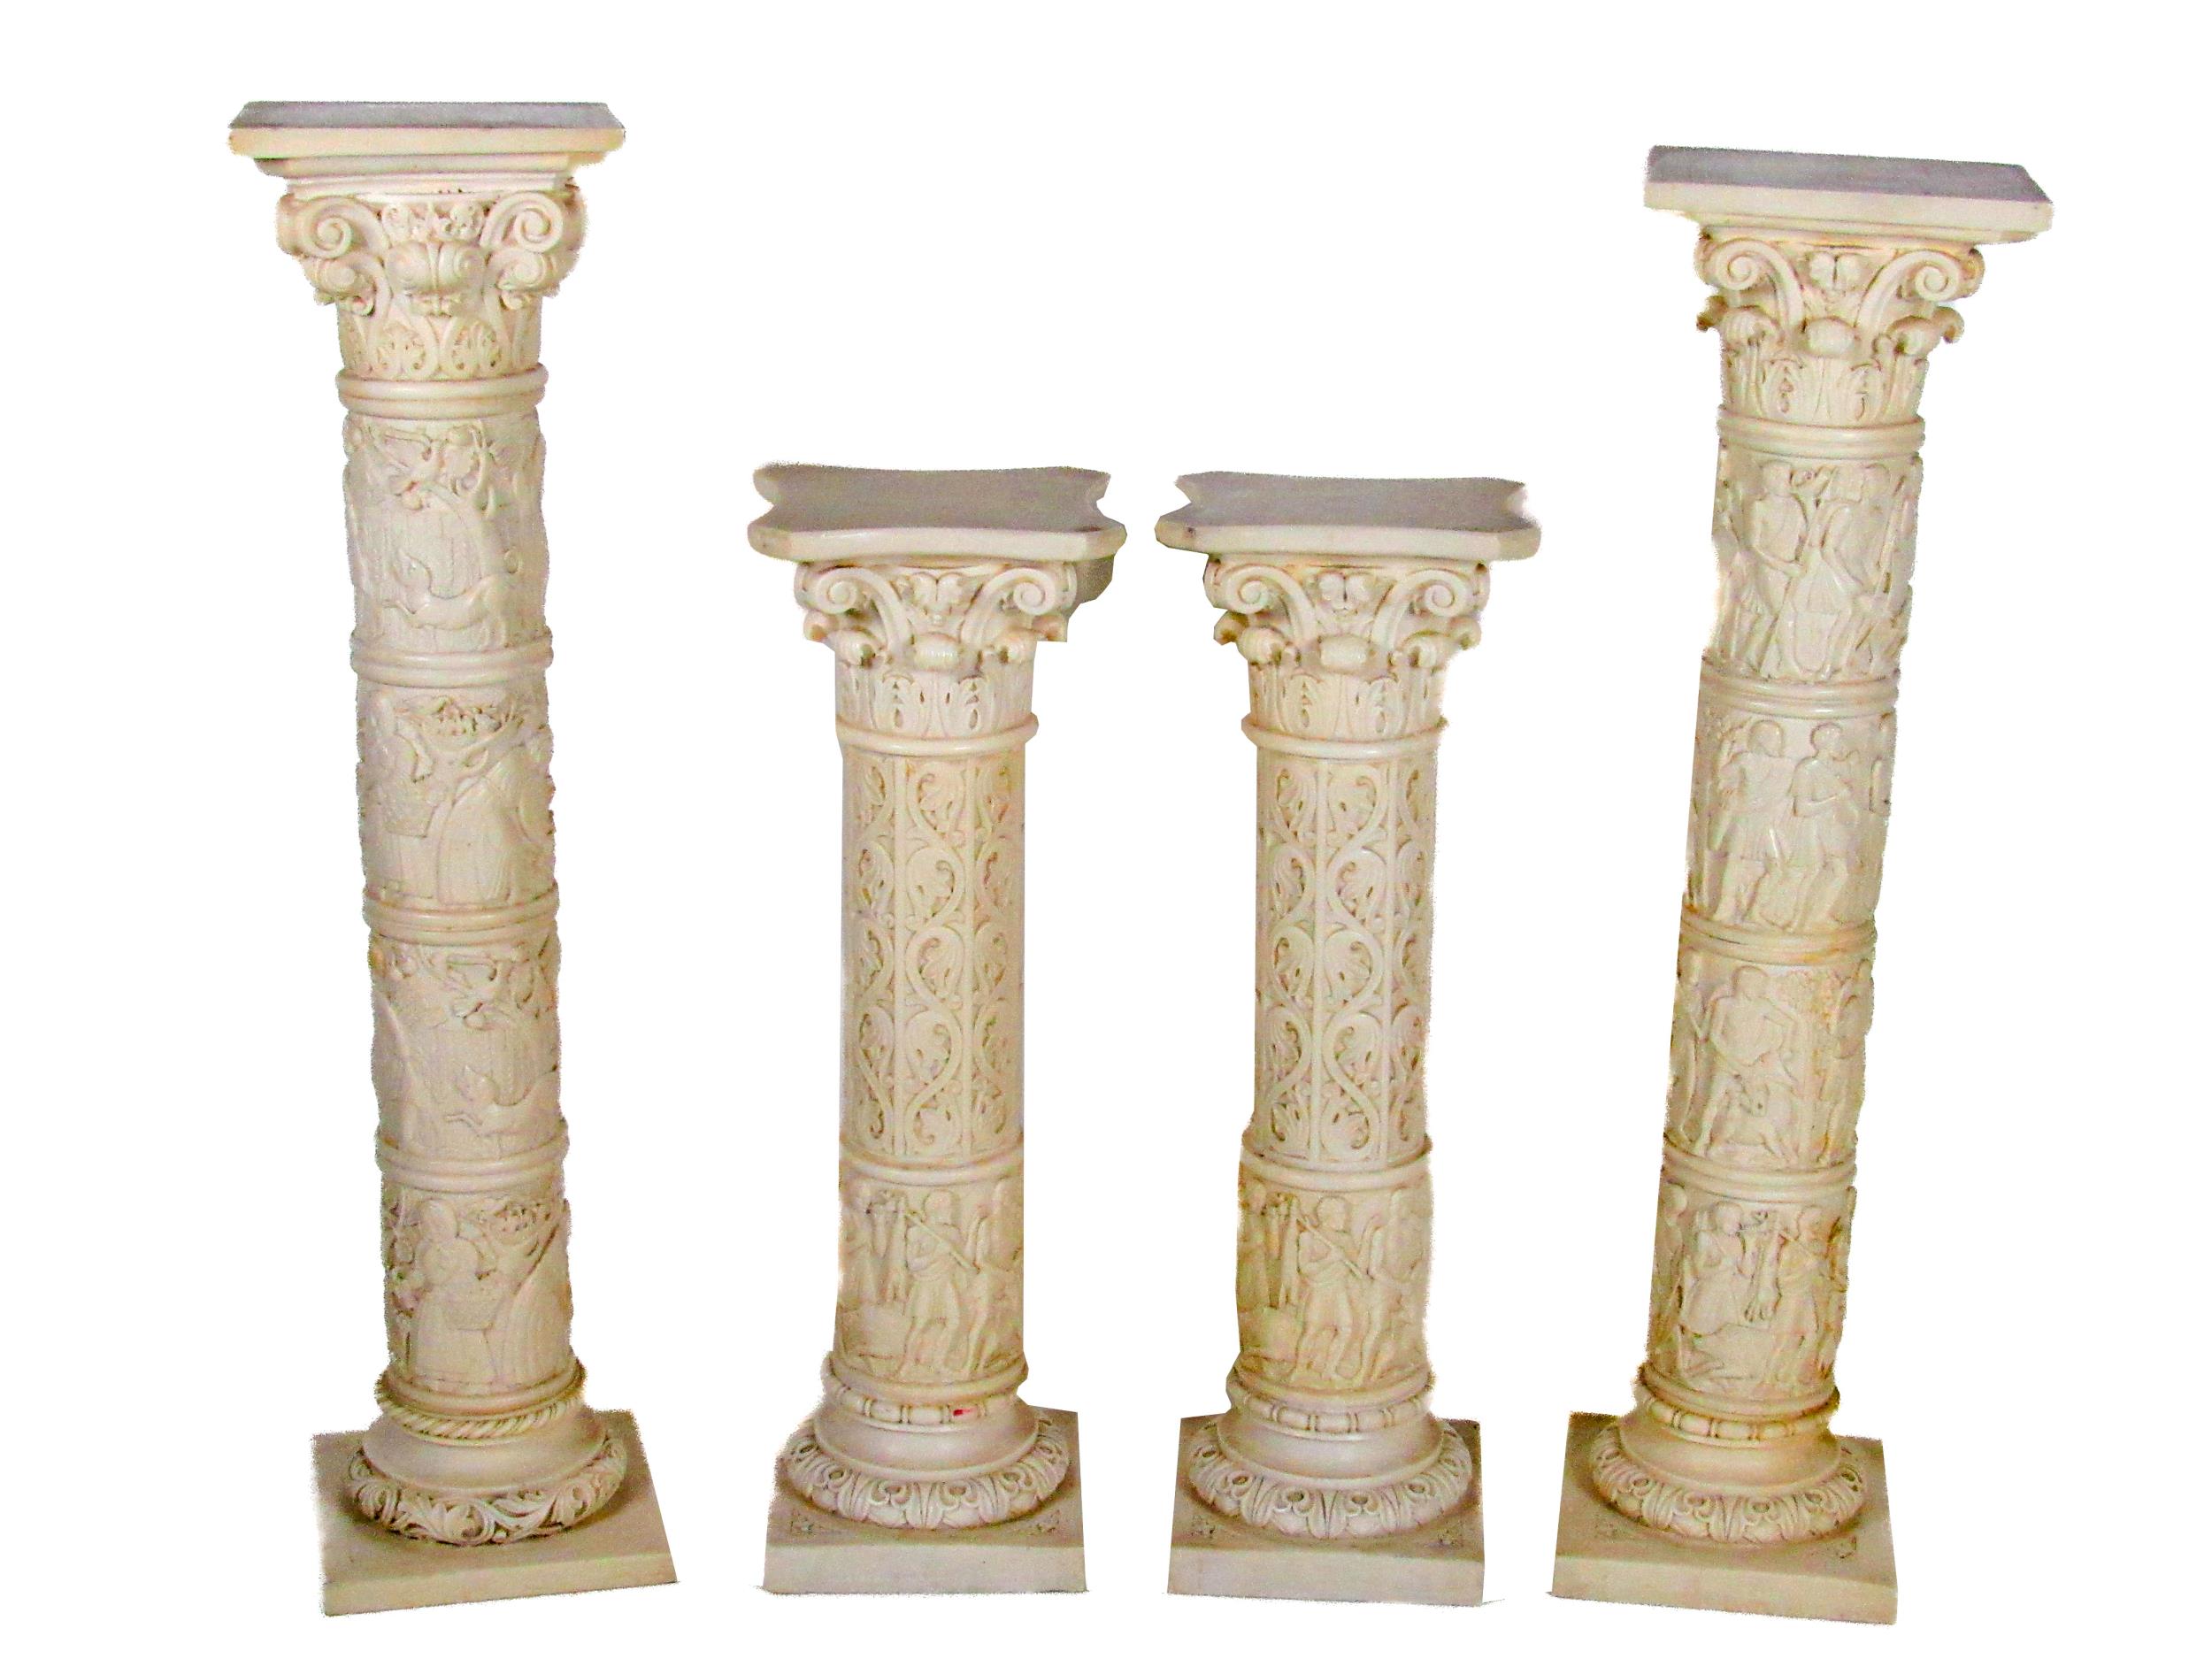 A pair of assimilated marble Columns, with square tops over Corinthian capitals and ornate